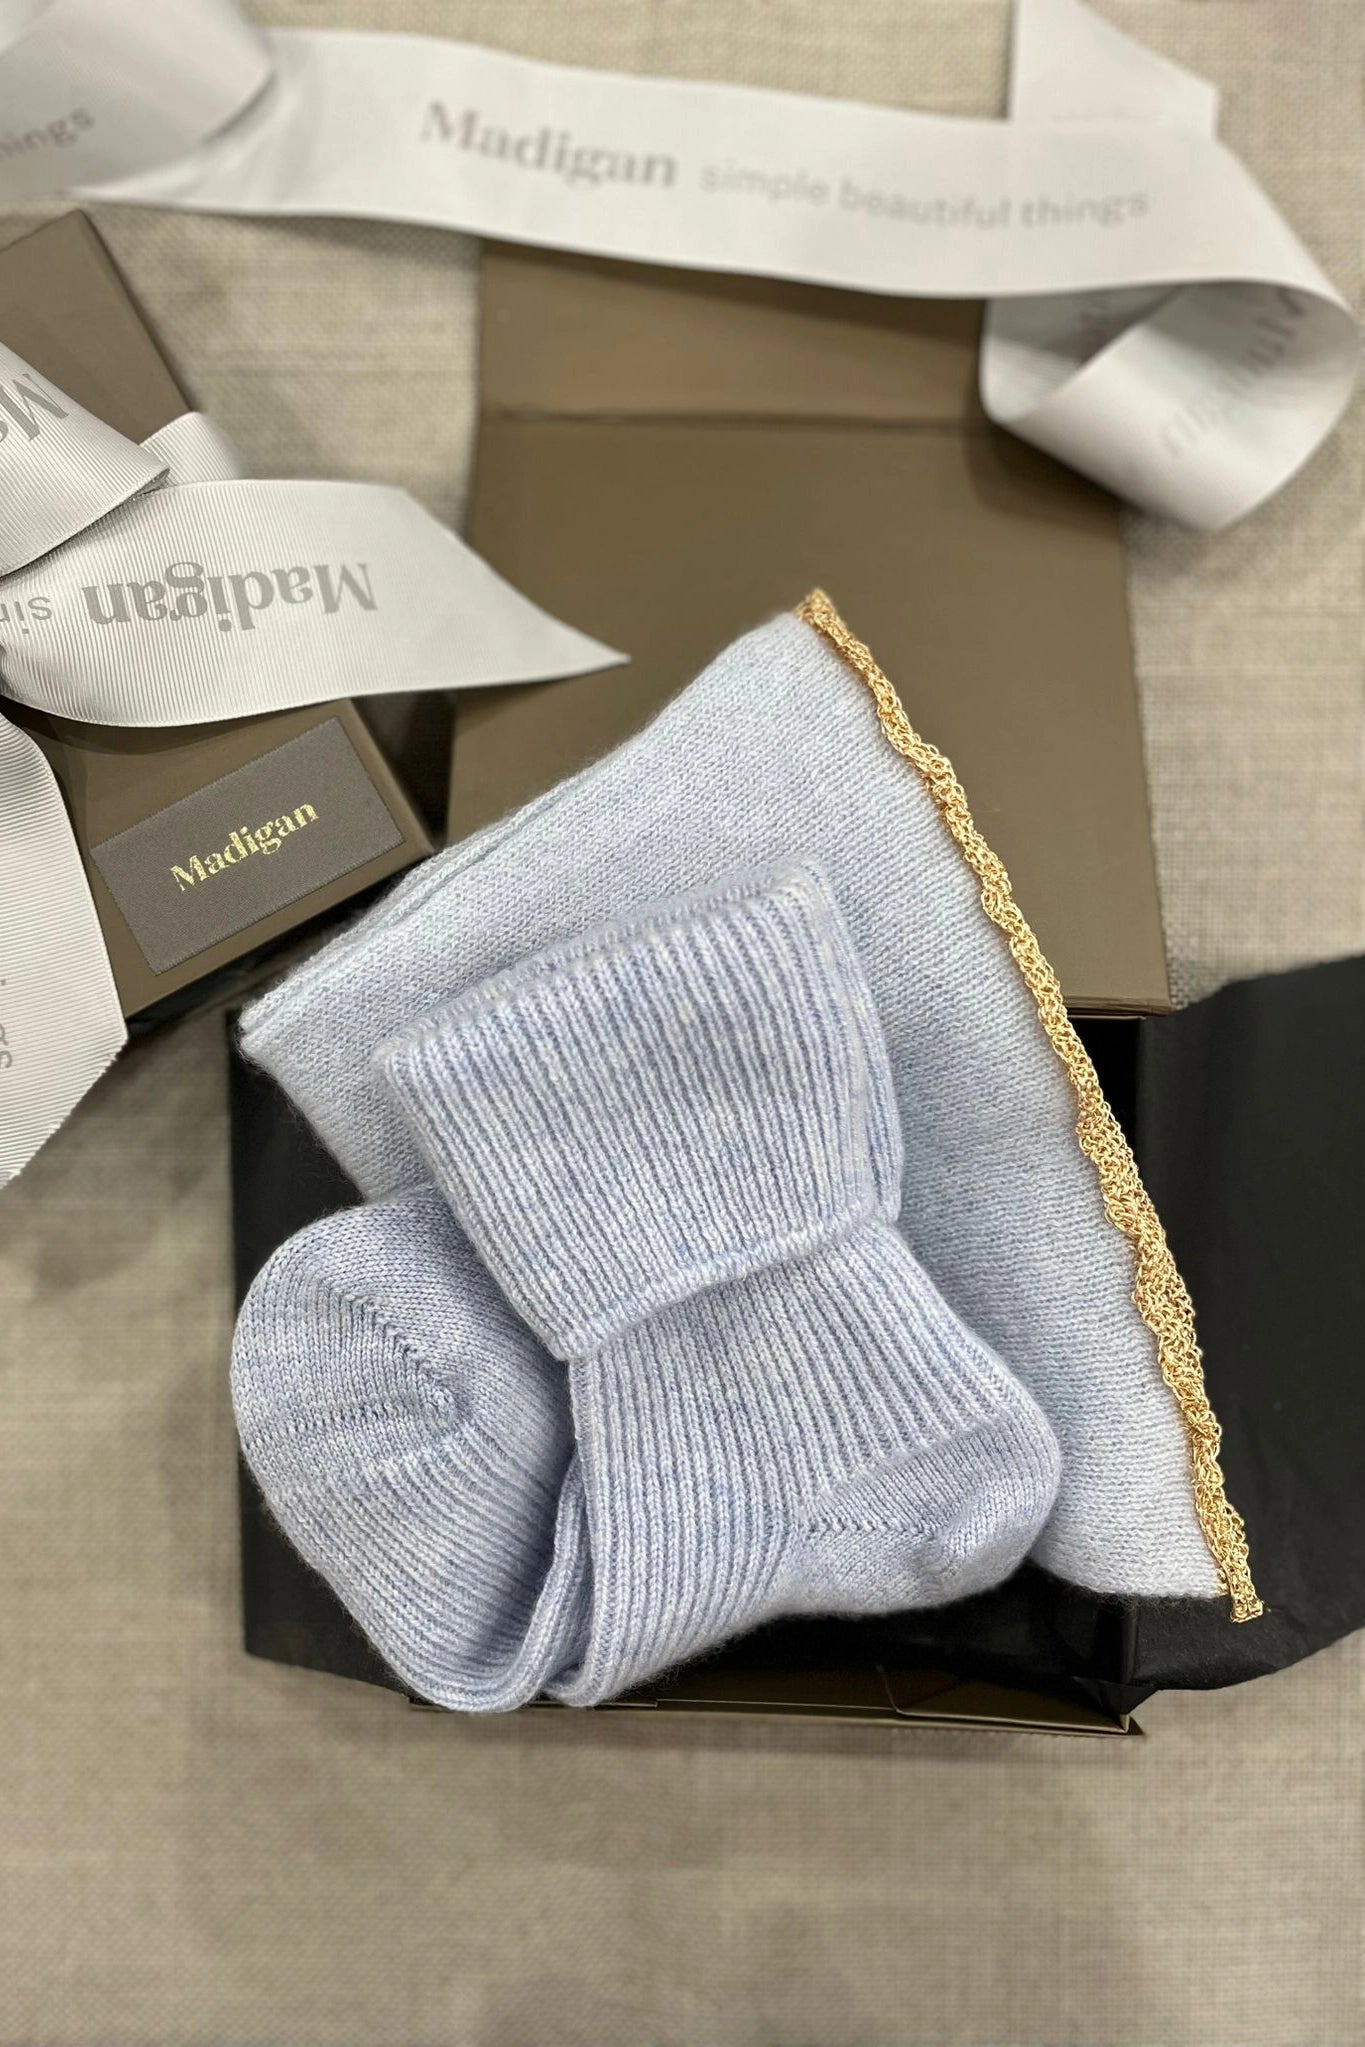 Luxury Cashmere Gift Set Socks and Scarf in Pale Blue